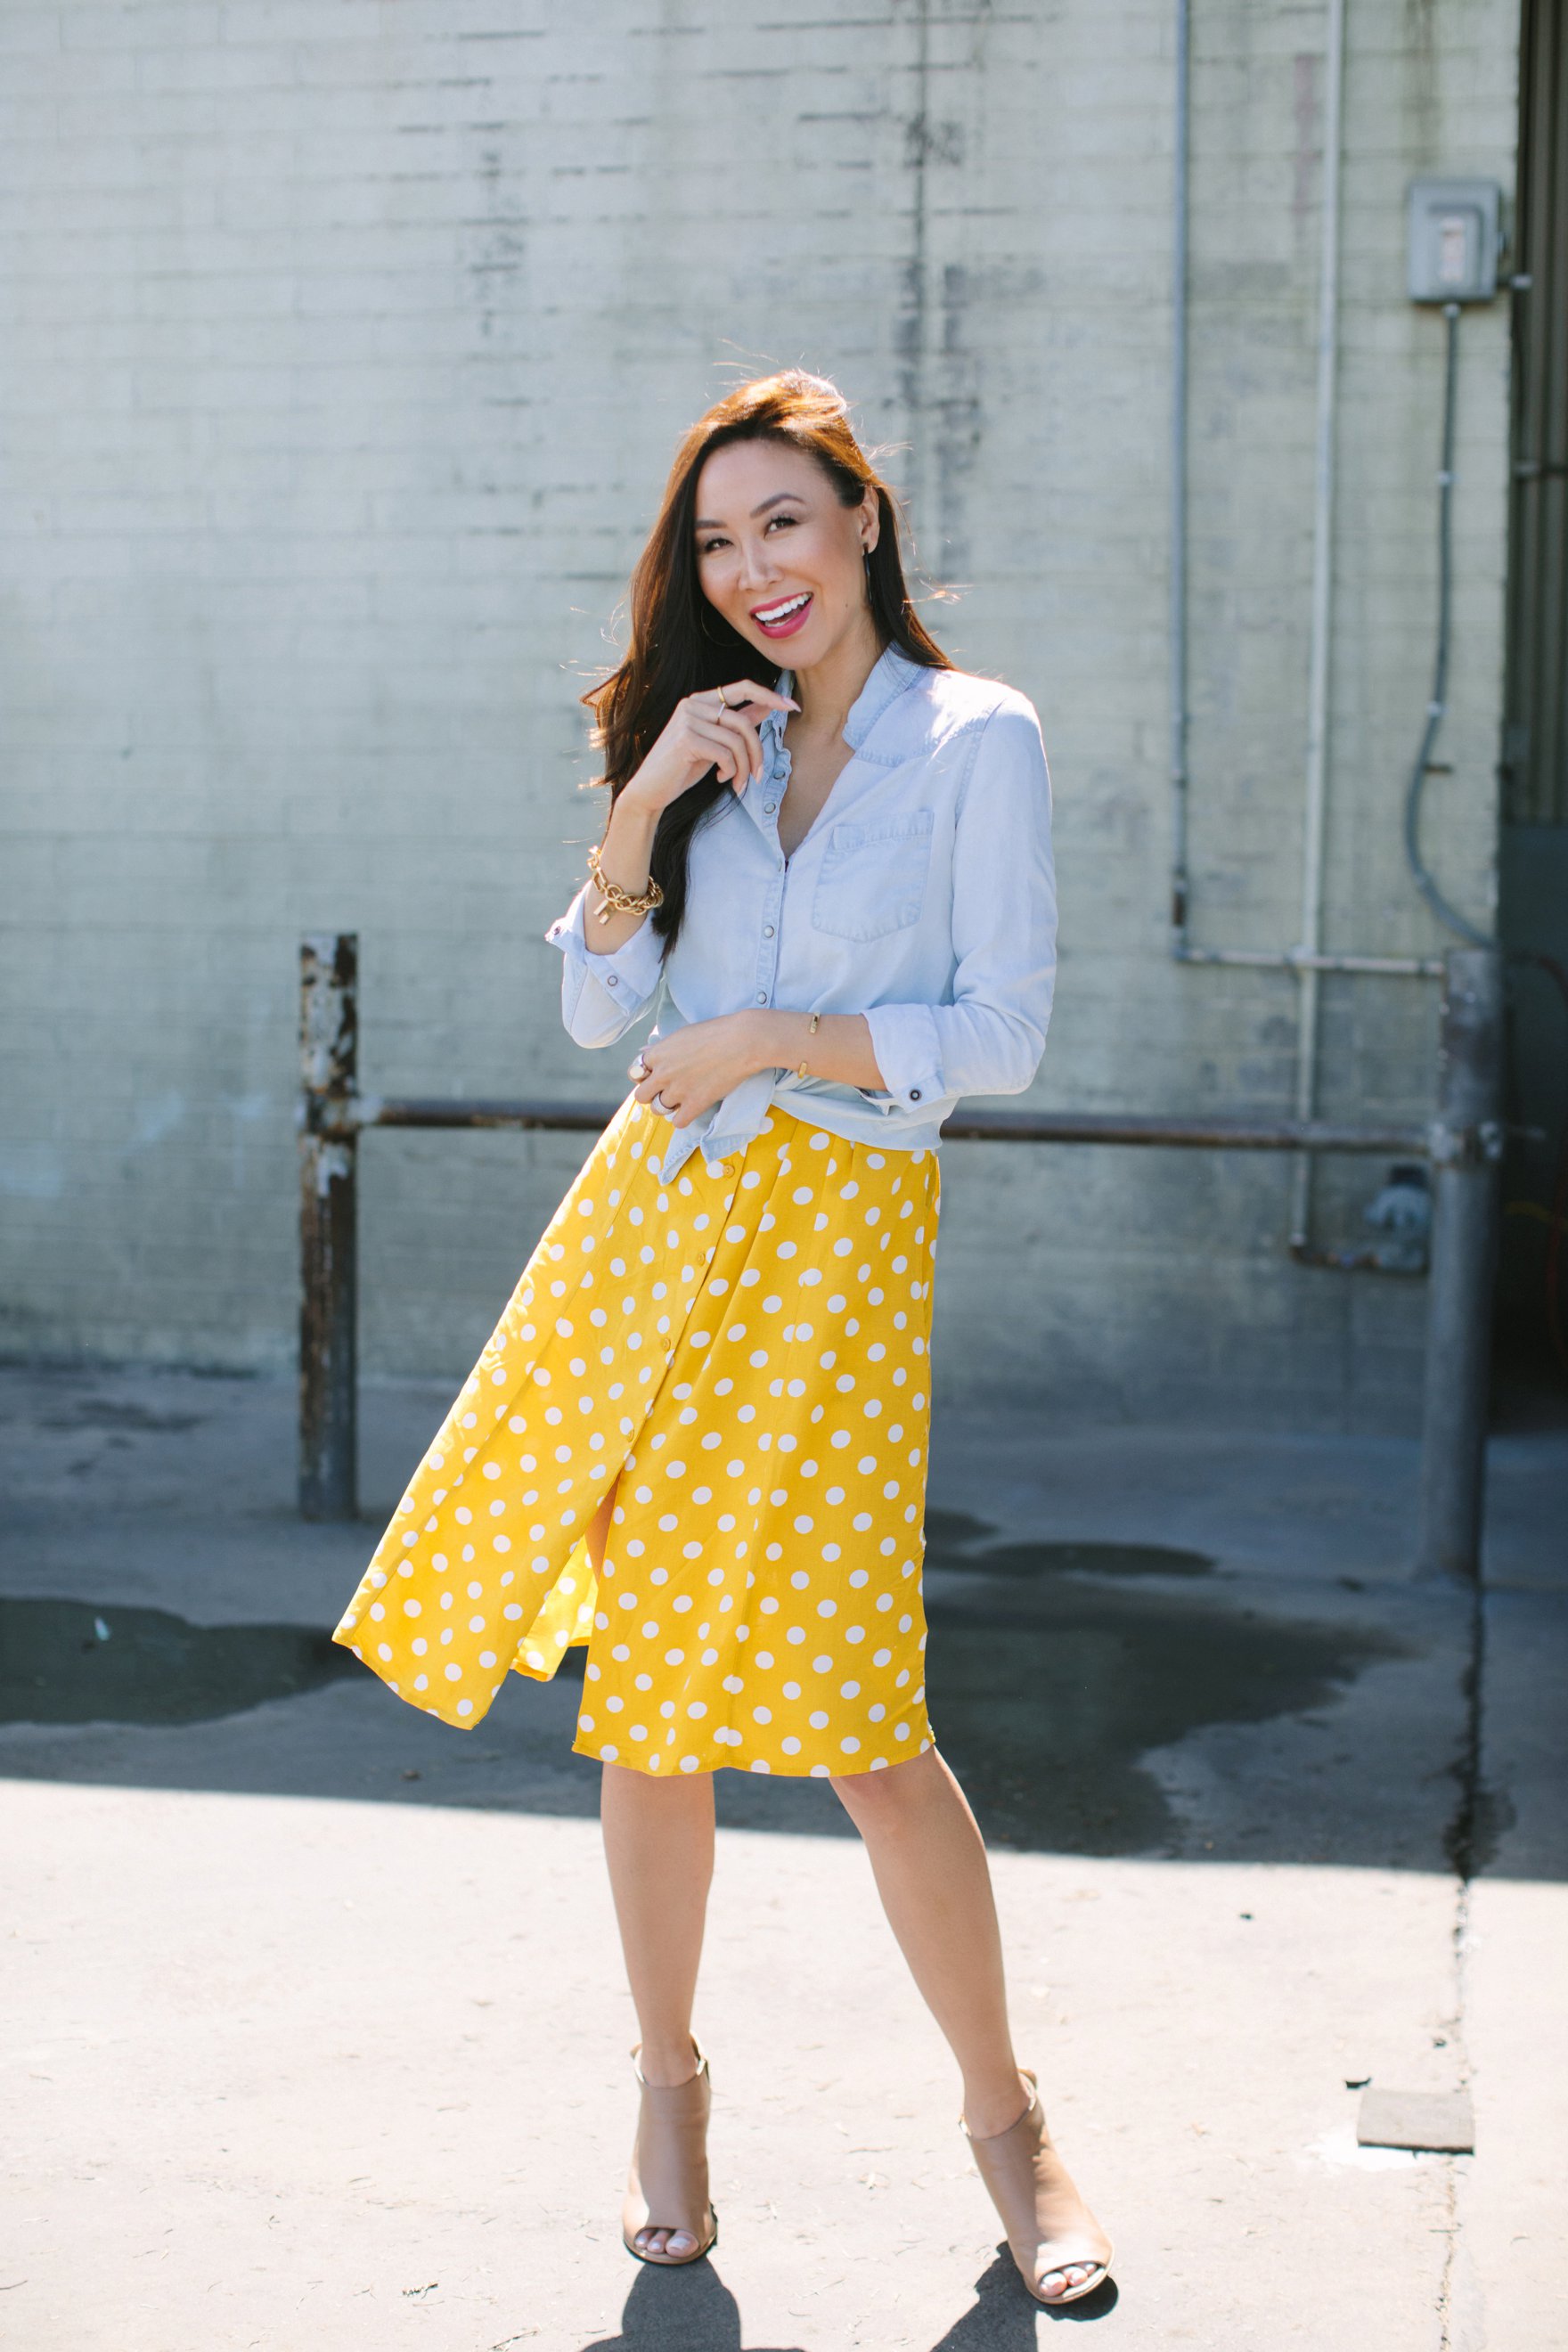 Yellow and white polka dot dress forever 21 paired with a chambray top featuring India hicks bracelet and other jewels lifestyle blogger Diana Elizabeth